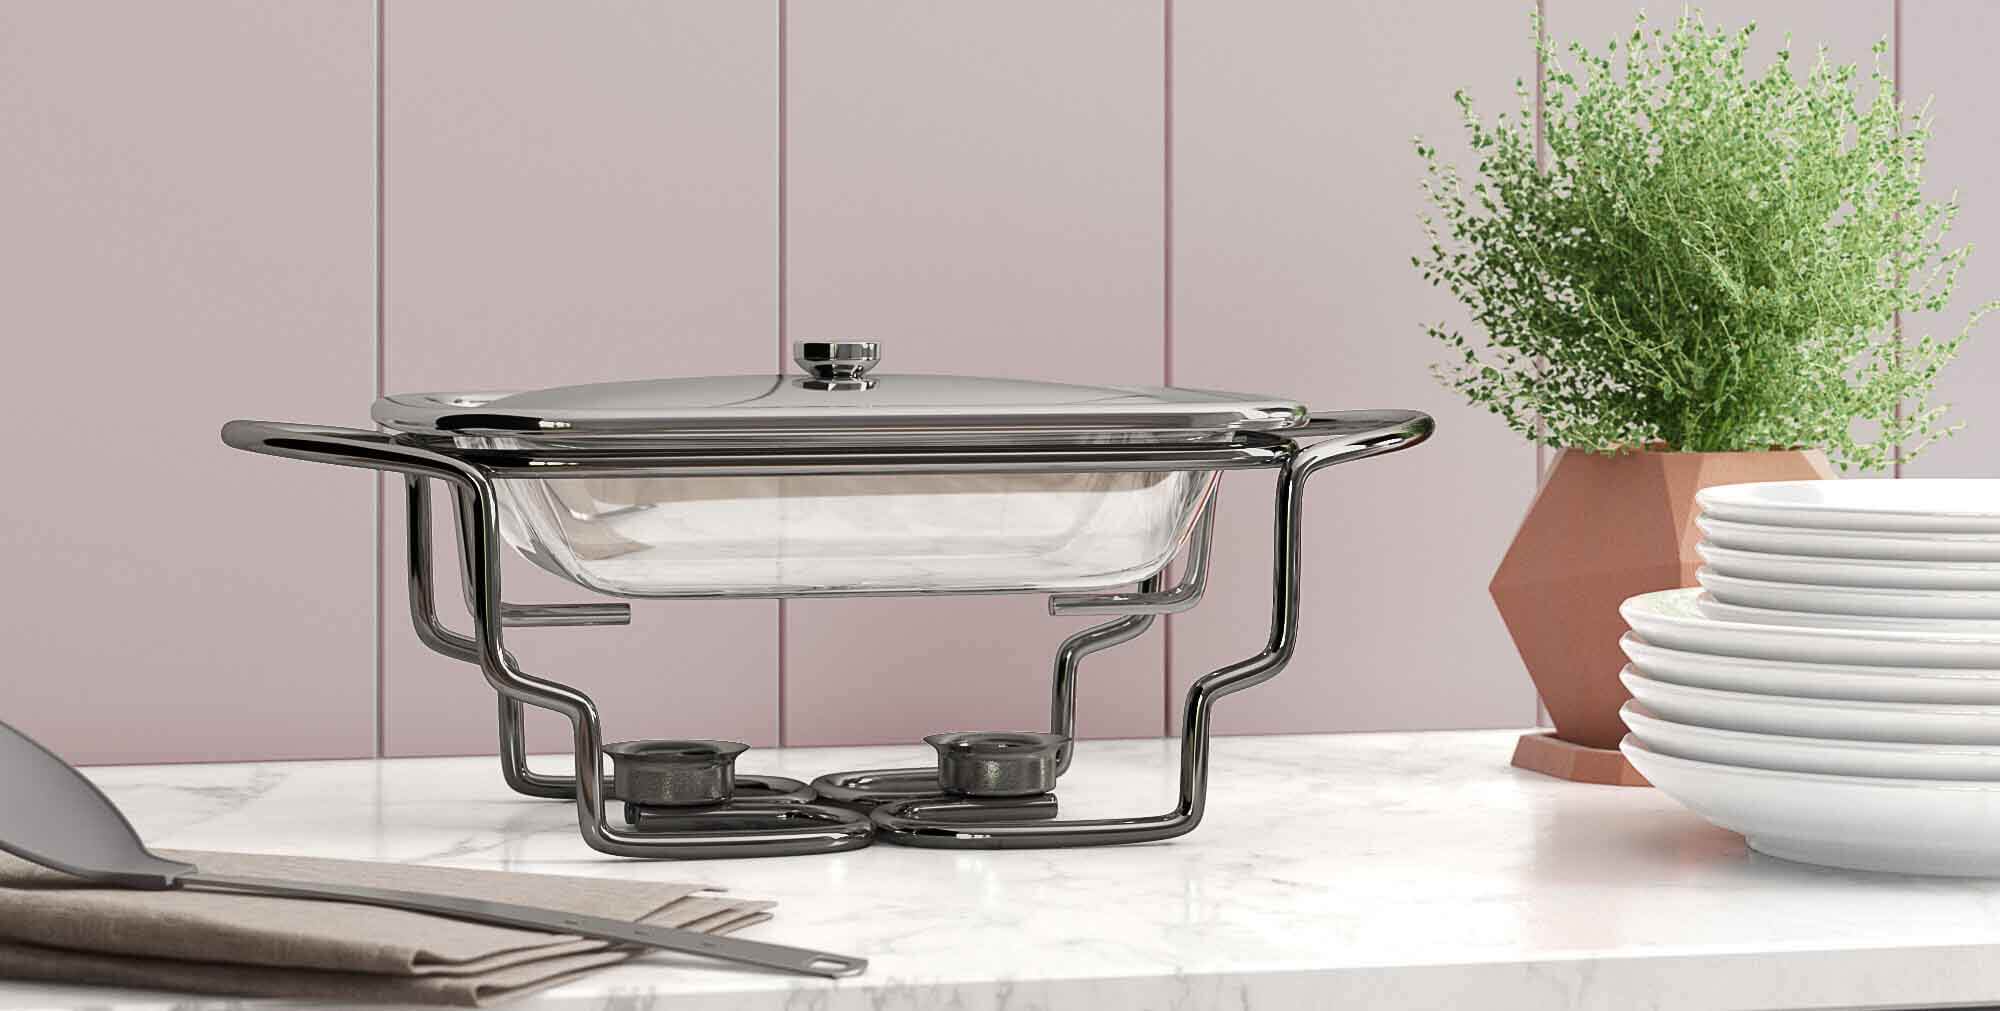 https://www.lesdelicesdalexandre.fr/wp-content/uploads/2020/07/rectangle-stainless-steel-food-warmer-with-marinex-glass-dish.jpg